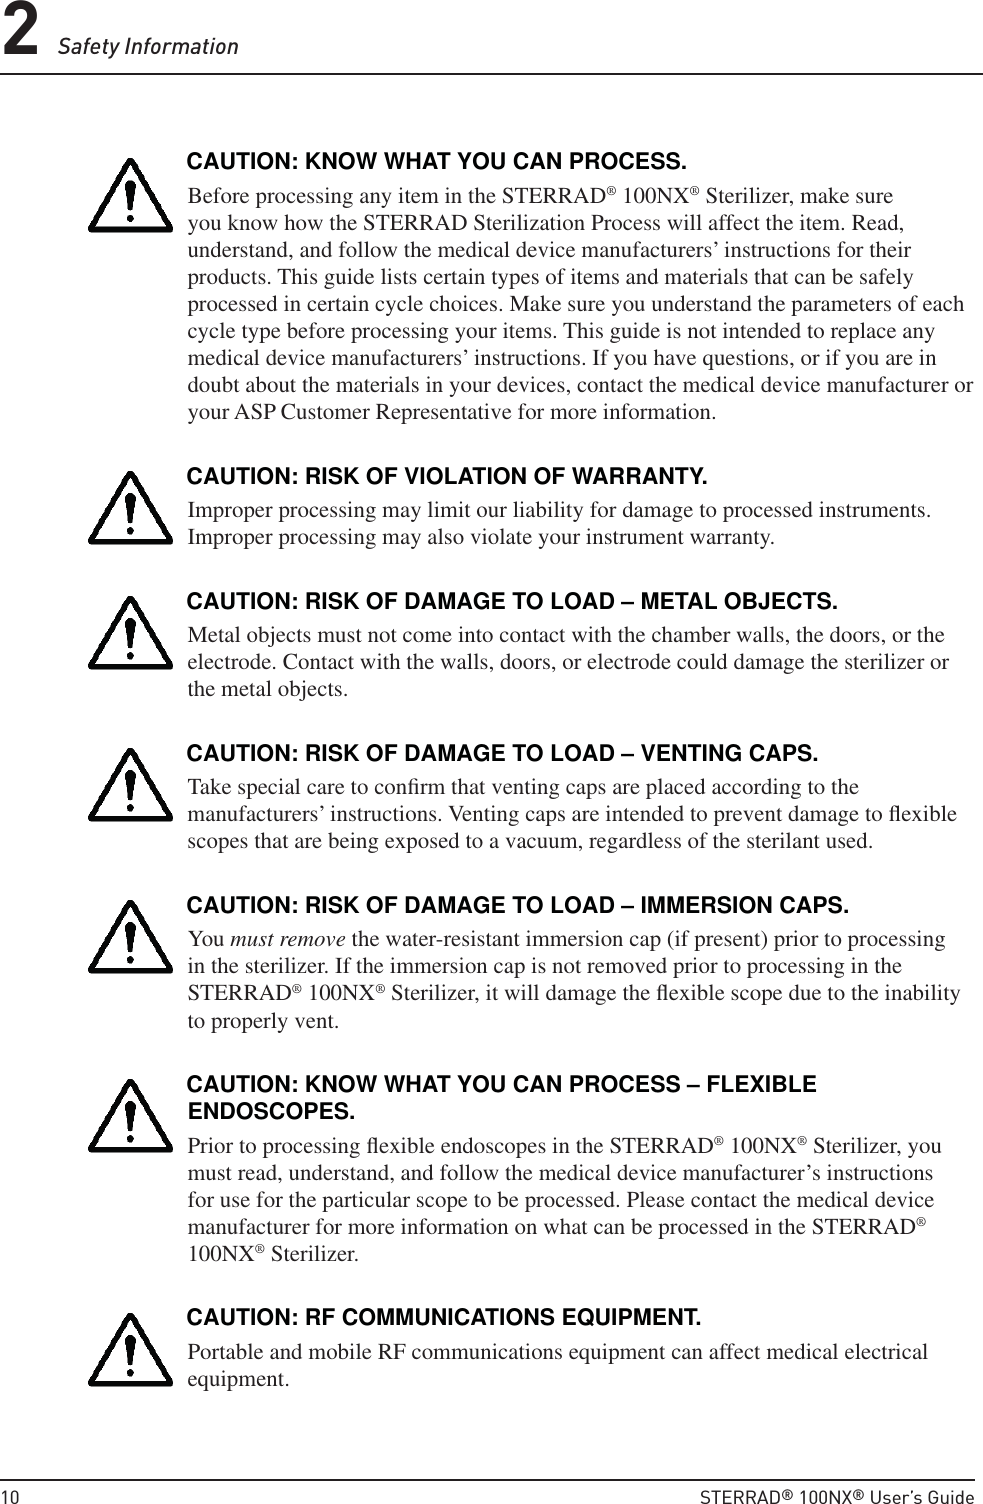 2 Safety Information10  STERRAD® 100NX® User’s GuideCAUTION: KNOW WHAT YOU CAN PROCESS.Before processing any item in the STERRAD® 100NX® Sterilizer, make sure you know how the STERRAD Sterilization Process will affect the item. Read, understand, and follow the medical device manufacturers’ instructions for their products. This guide lists certain types of items and materials that can be safely processed in certain cycle choices. Make sure you understand the parameters of each cycle type before processing your items. This guide is not intended to replace any medical device manufacturers’ instructions. If you have questions, or if you are in doubt about the materials in your devices, contact the medical device manufacturer or your ASP Customer Representative for more information.CAUTION: RISK OF VIOLATION OF WARRANTY.Improper processing may limit our liability for damage to processed instruments. Improper processing may also violate your instrument warranty.CAUTION: RISK OF DAMAGE TO LOAD – METAL OBJECTS.Metal objects must not come into contact with the chamber walls, the doors, or the electrode. Contact with the walls, doors, or electrode could damage the sterilizer or the metal objects.CAUTION: RISK OF DAMAGE TO LOAD – VENTING CAPS.Take special care to conﬁ rm that venting caps are placed according to the manufacturers’ instructions. Venting caps are intended to prevent damage to ﬂ exible scopes that are being exposed to a vacuum, regardless of the sterilant used.CAUTION: RISK OF DAMAGE TO LOAD – IMMERSION CAPS.You must remove the water-resistant immersion cap (if present) prior to processing in the sterilizer. If the immersion cap is not removed prior to processing in the STERRAD® 100NX® Sterilizer, it will damage the ﬂ exible scope due to the inability to properly vent. CAUTION: KNOW WHAT YOU CAN PROCESS – FLEXIBLE ENDOSCOPES.Prior to processing ﬂ exible endoscopes in the STERRAD® 100NX® Sterilizer, you must read, understand, and follow the medical device manufacturer’s instructions for use for the particular scope to be processed. Please contact the medical device manufacturer for more information on what can be processed in the STERRAD® 100NX® Sterilizer.CAUTION: RF COMMUNICATIONS EQUIPMENT.Portable and mobile RF communications equipment can affect medical electrical equipment.